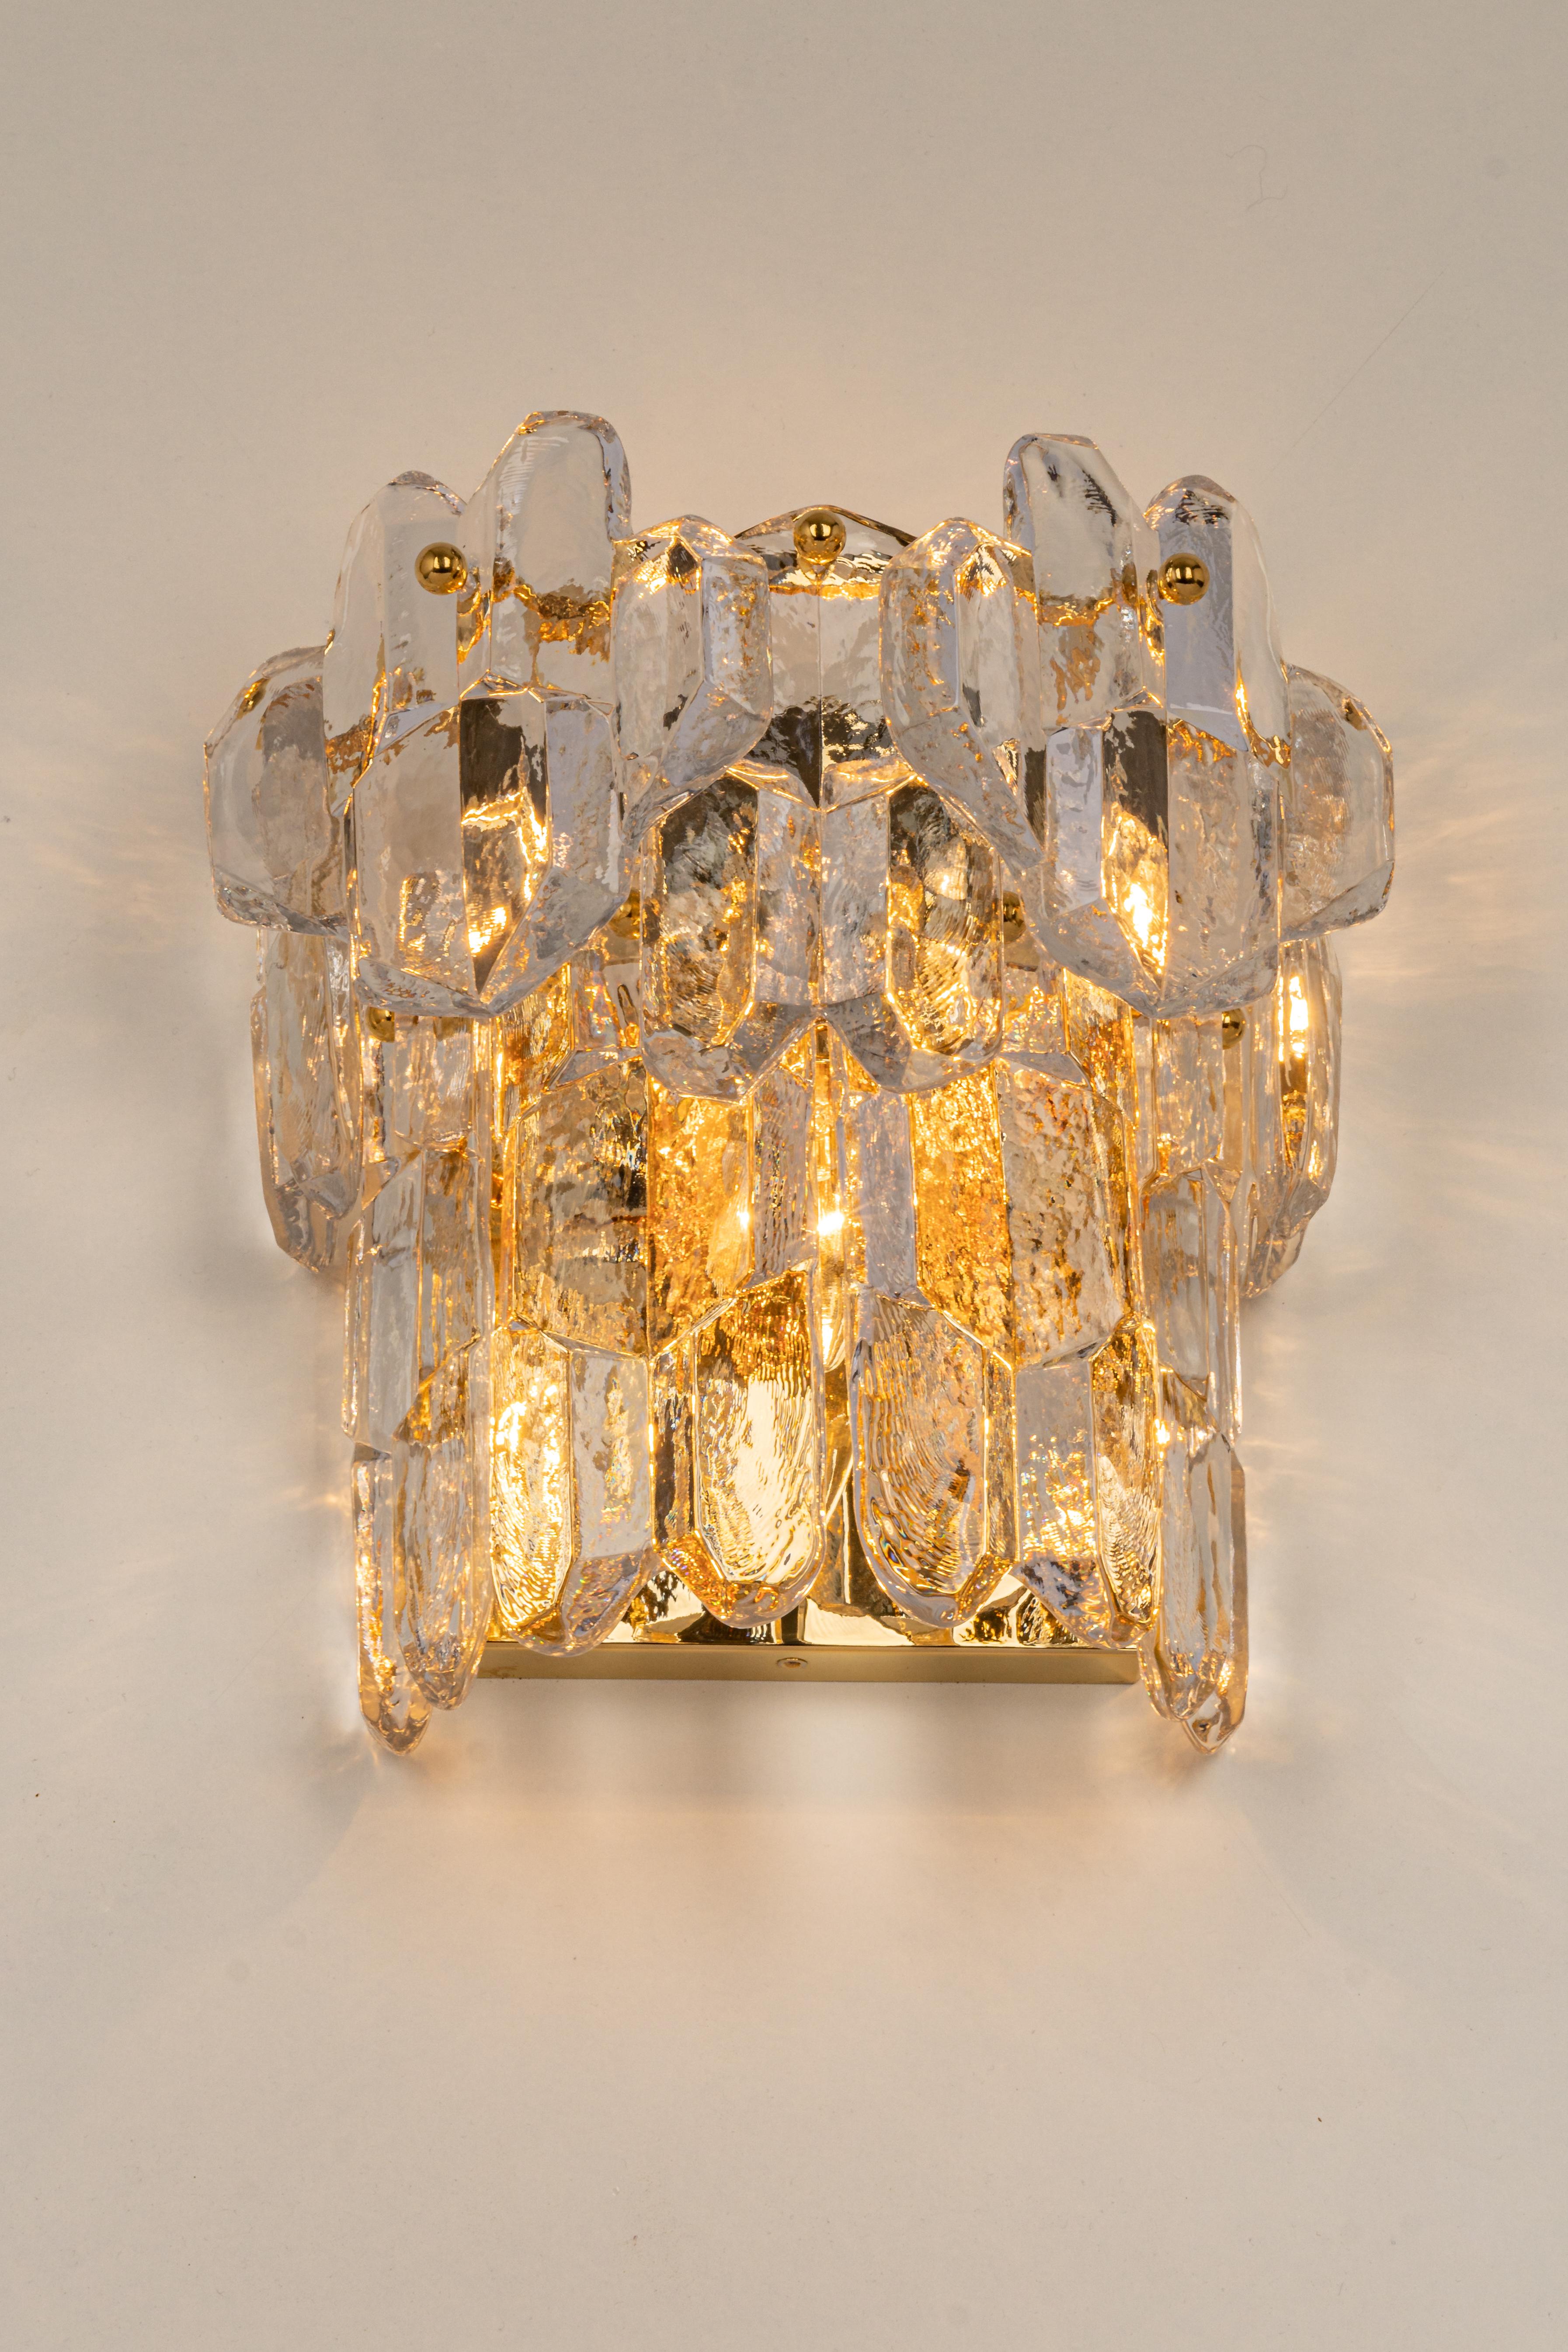 1 of 2 Pairs of Large Kalmar Sconces Wall Lights 'Palazzo', Austria, 1970s For Sale 1